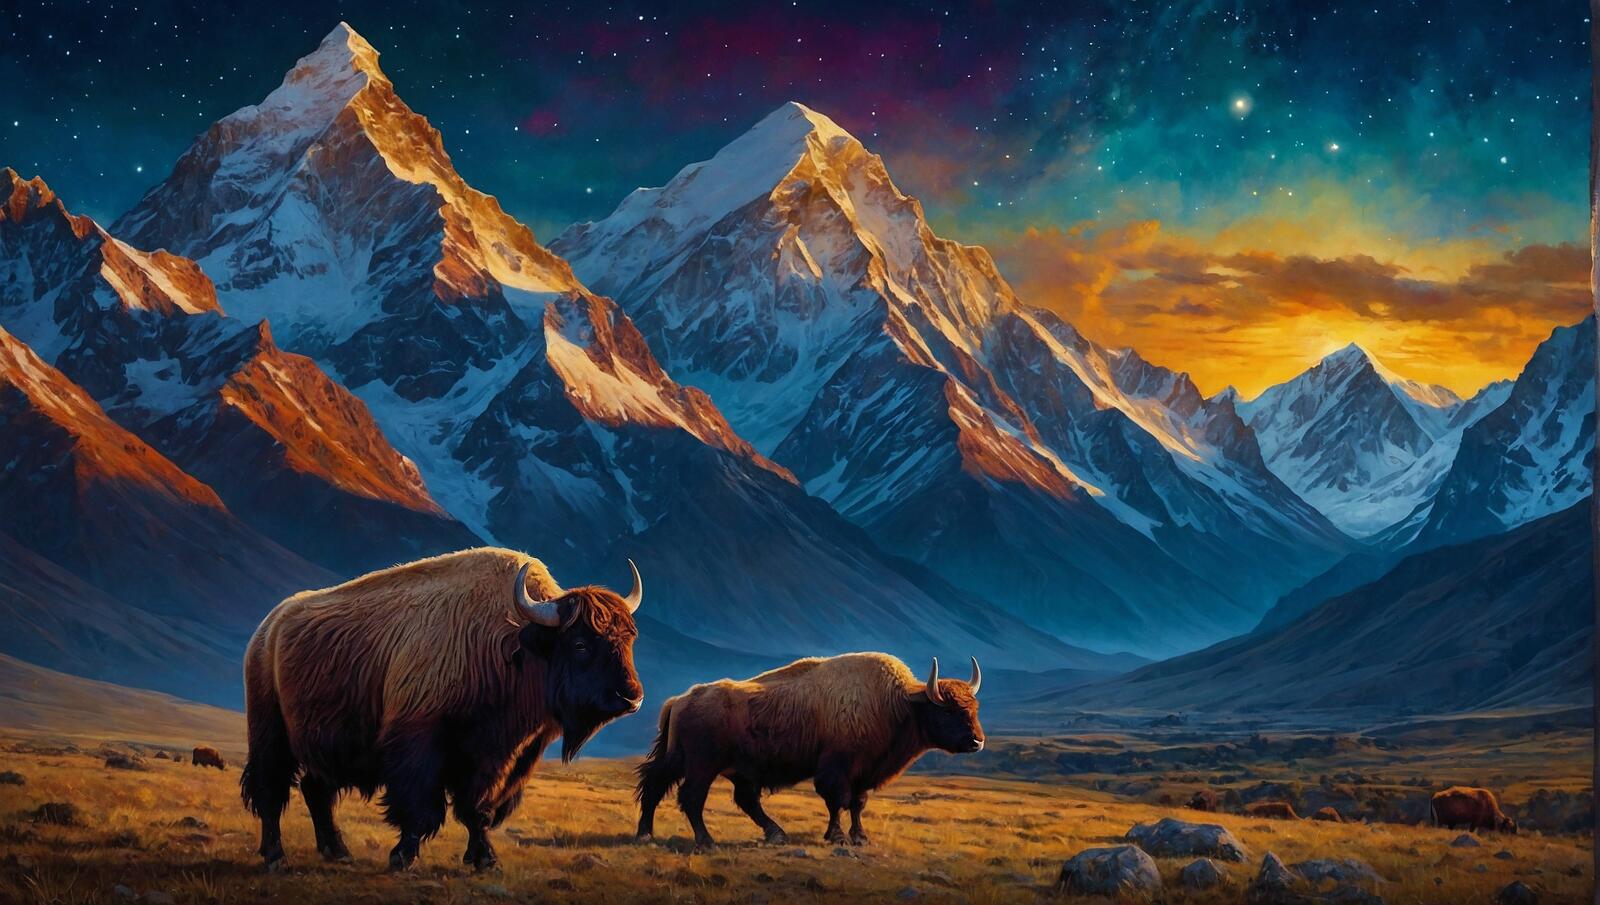 Free photo Two bison against the mountains in the sunset light.